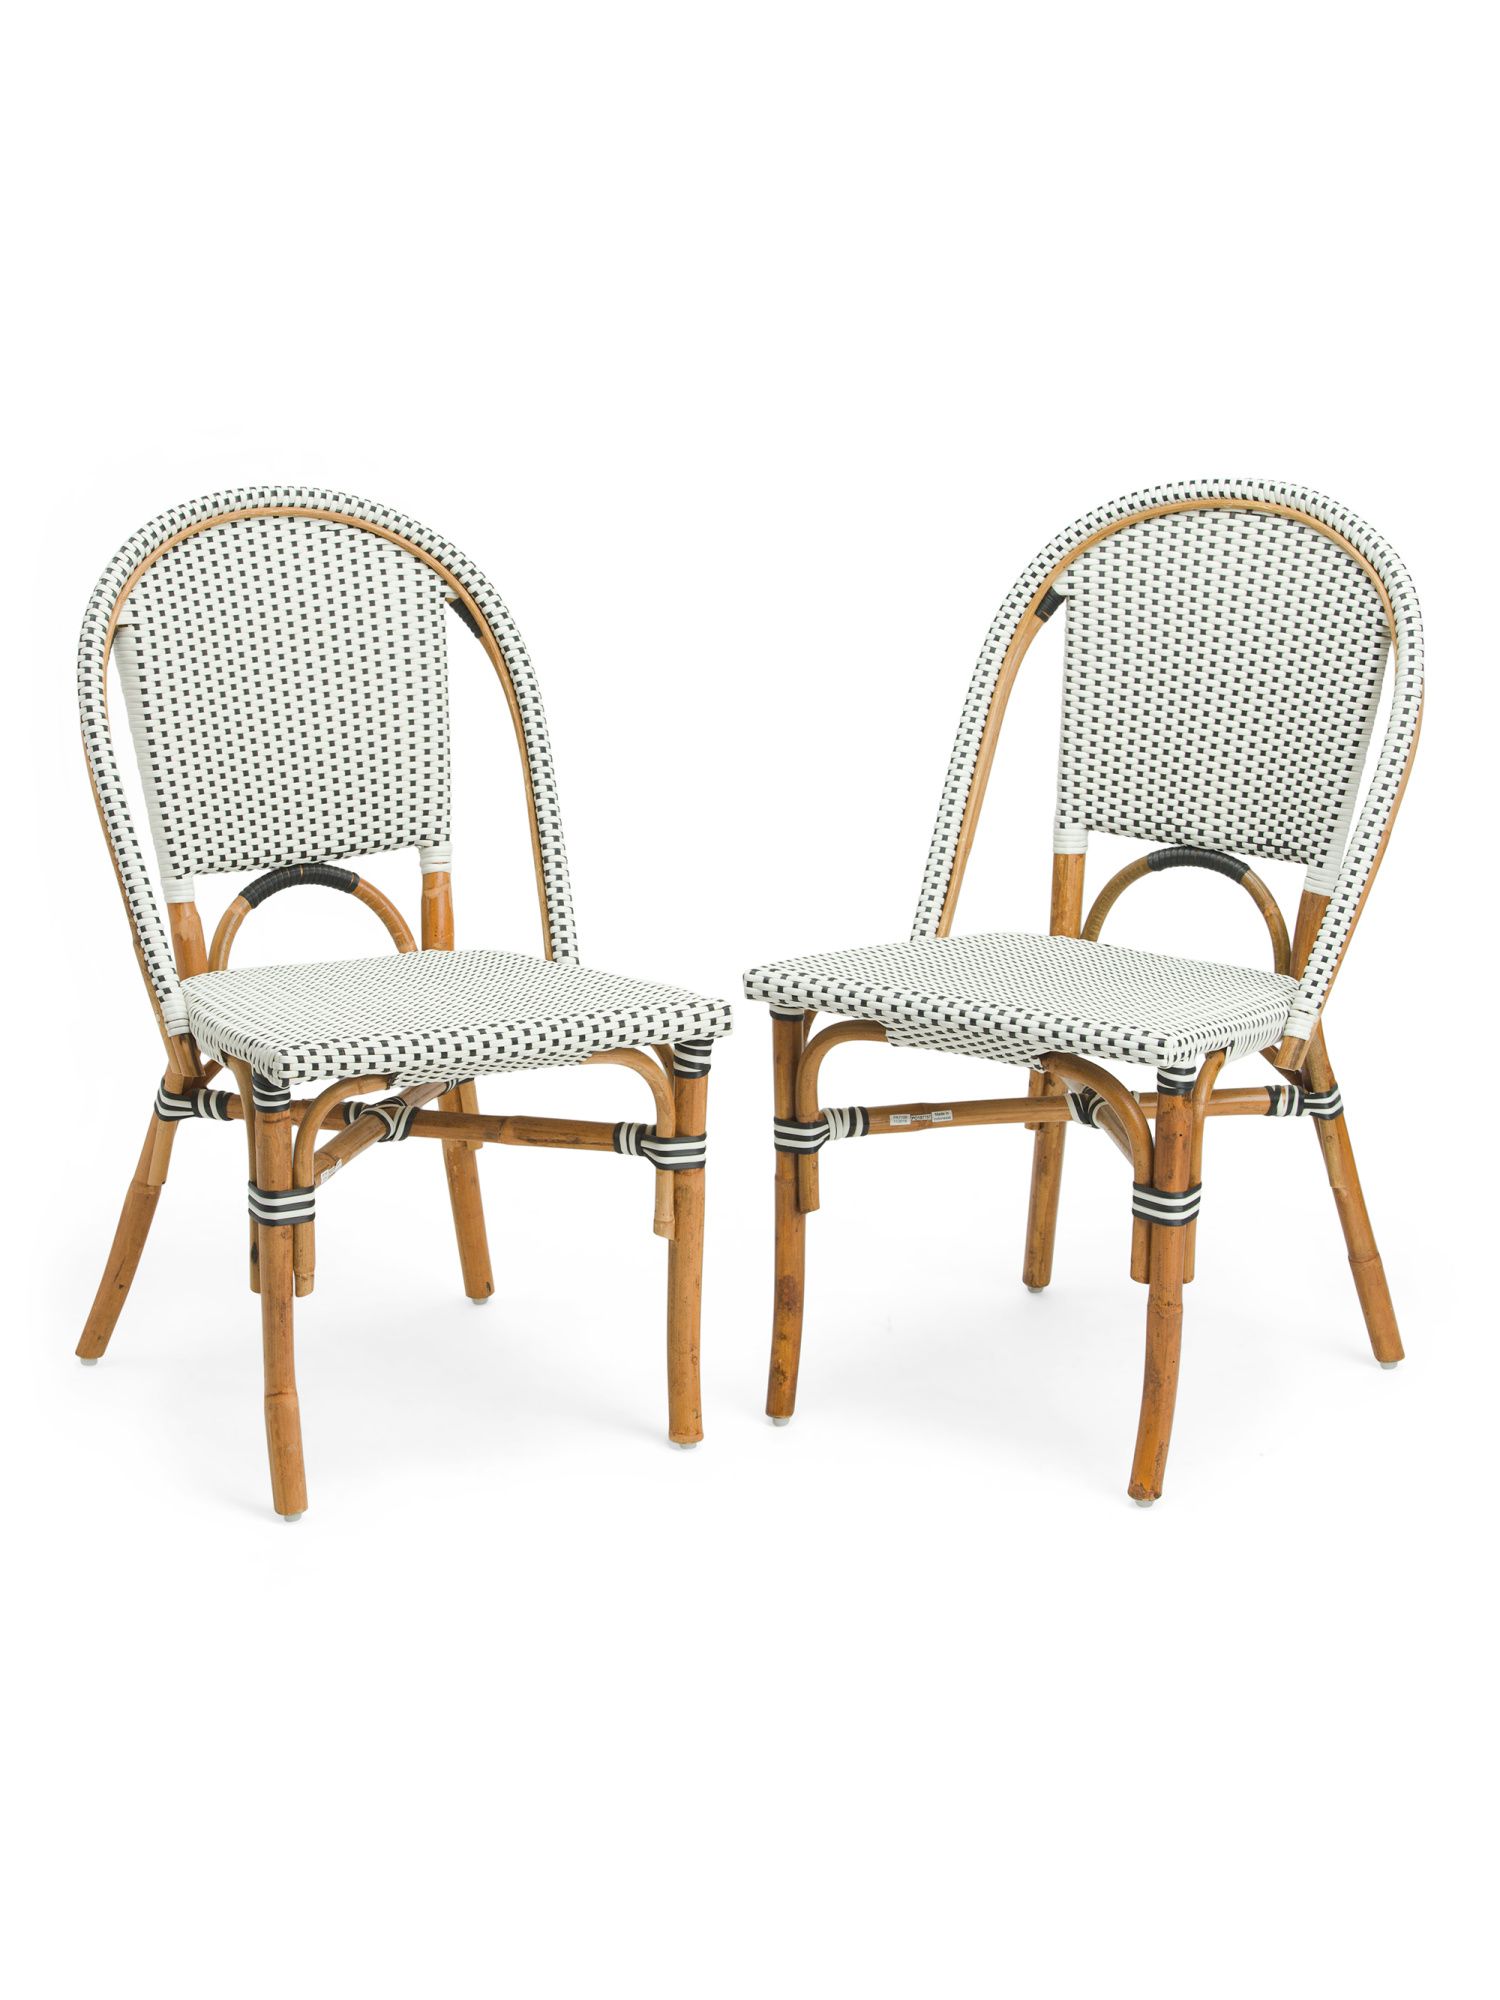 Set Of 2 Outdoor Bistro Chairs | TJ Maxx